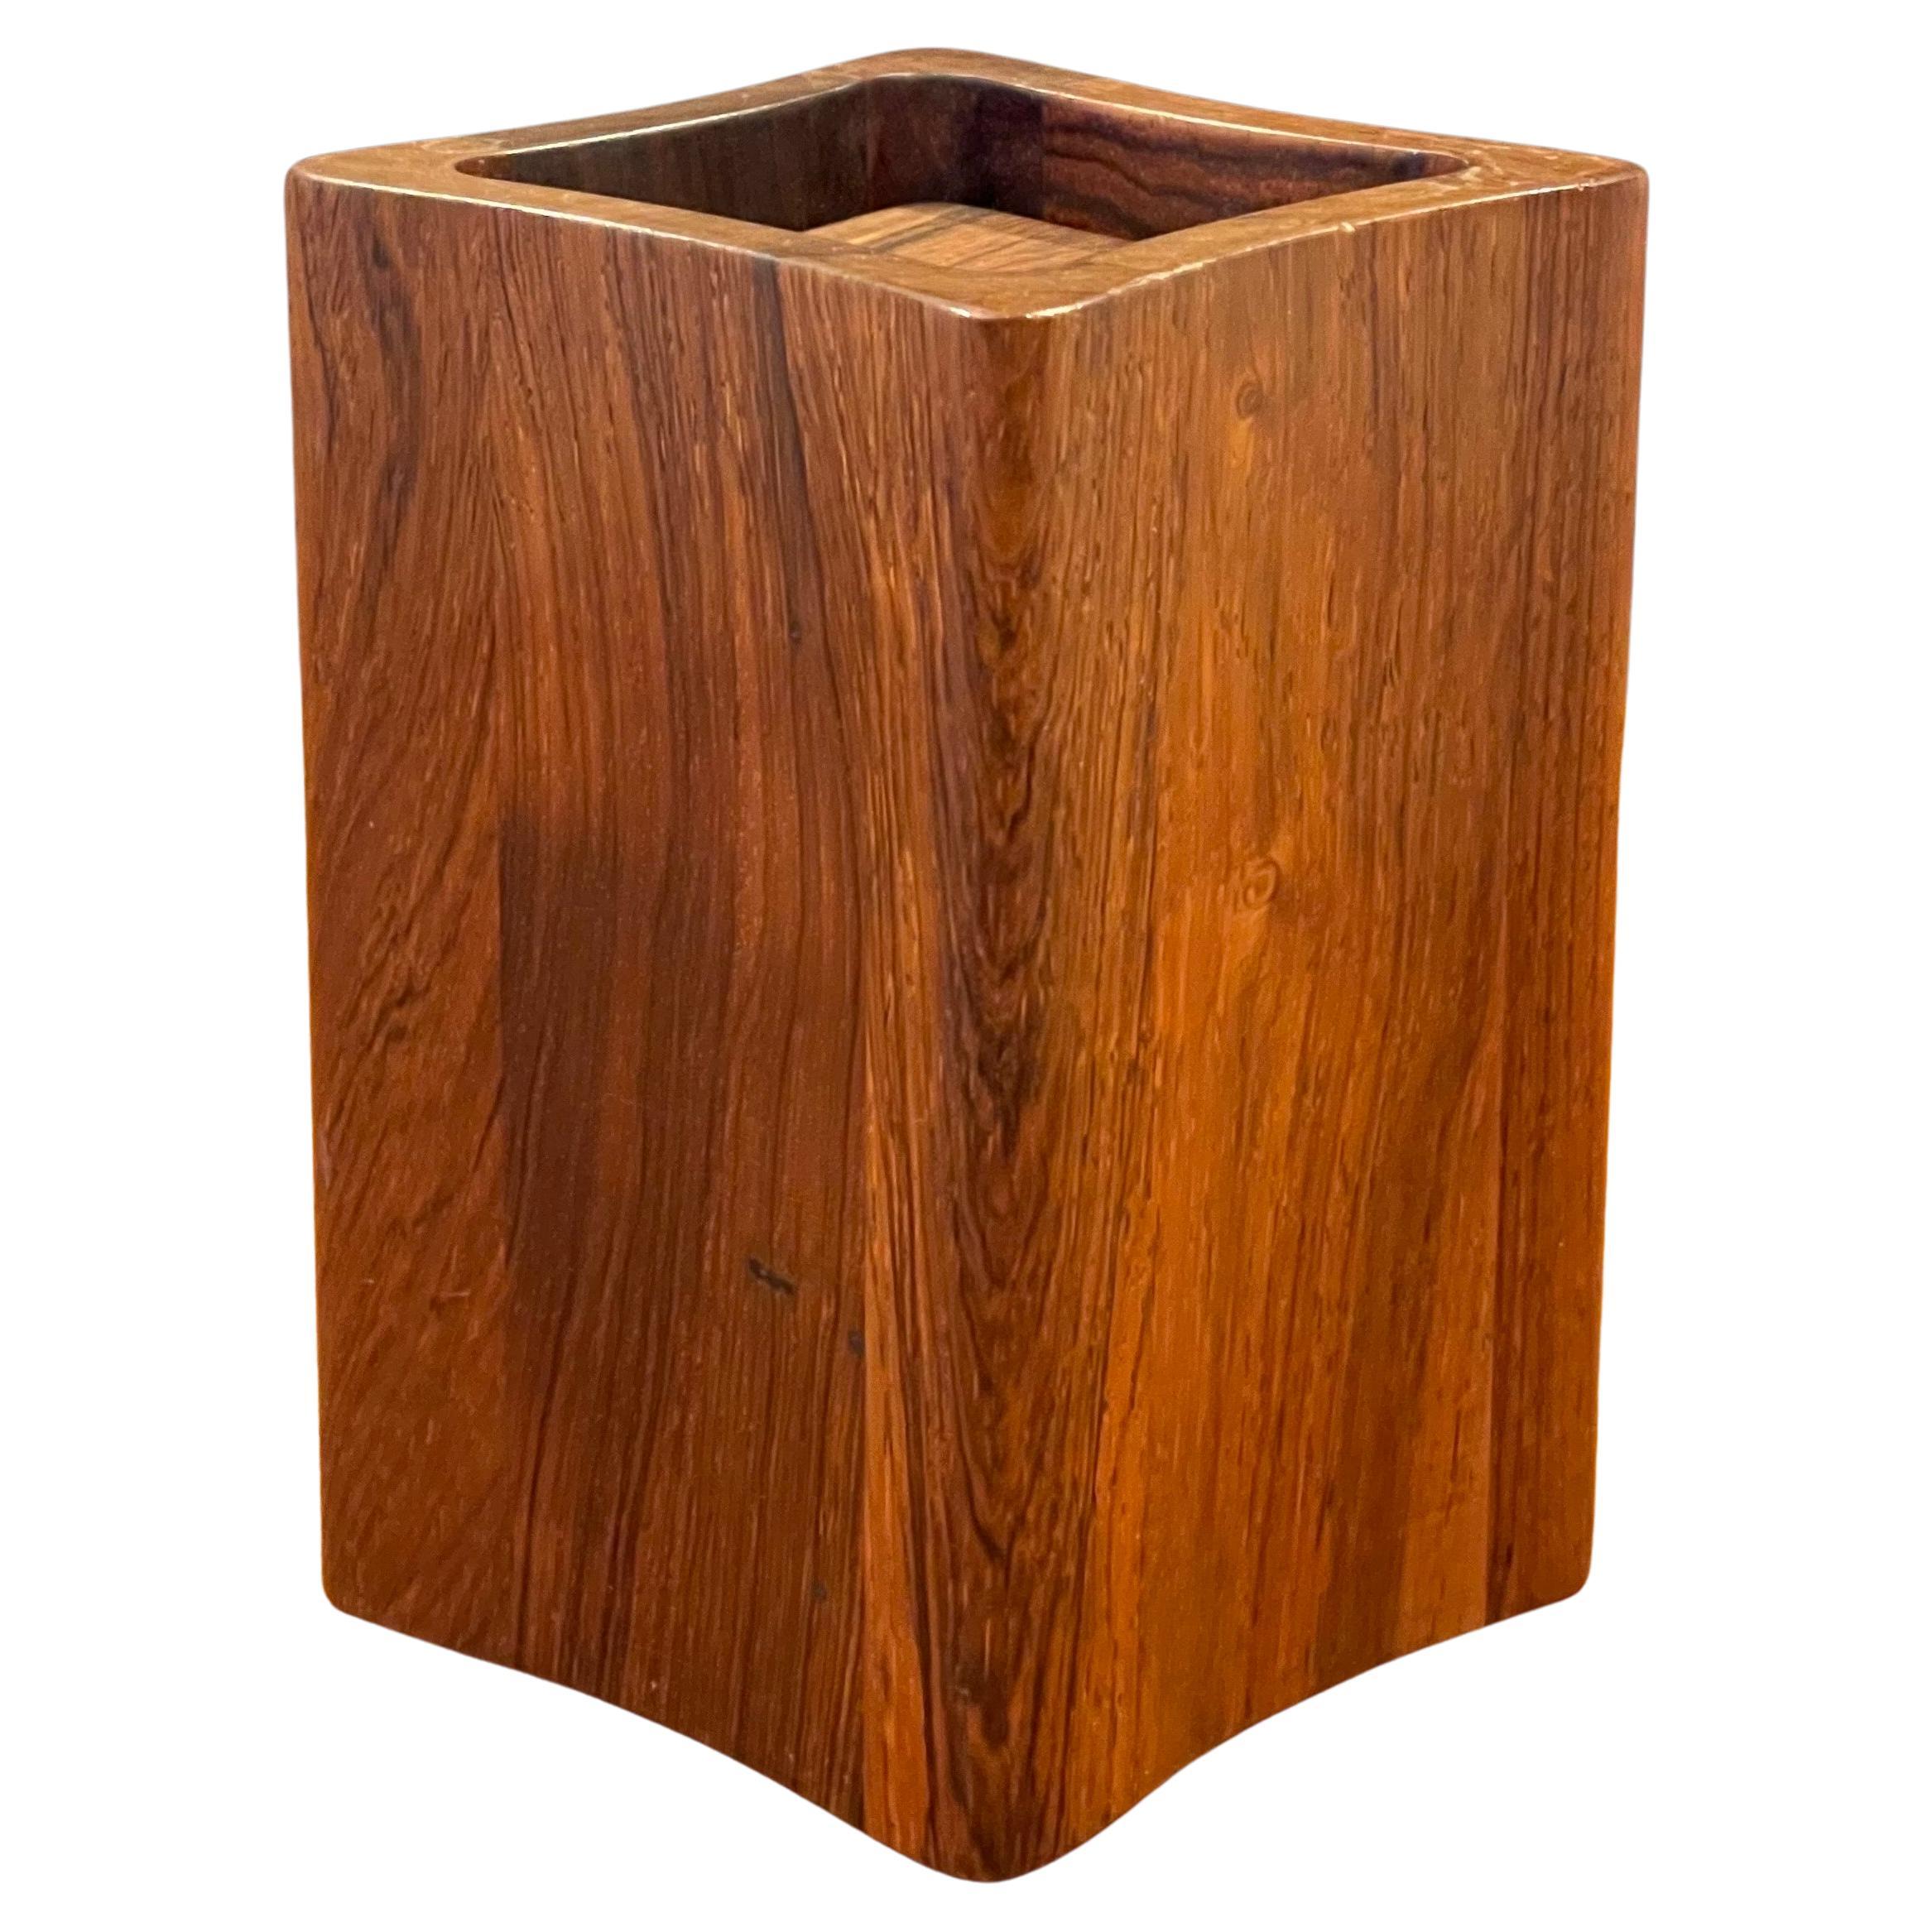 Palisander & Rosewood Box / Humidor by Jens Quistgaard for Dansk Rare Woods For Sale 9